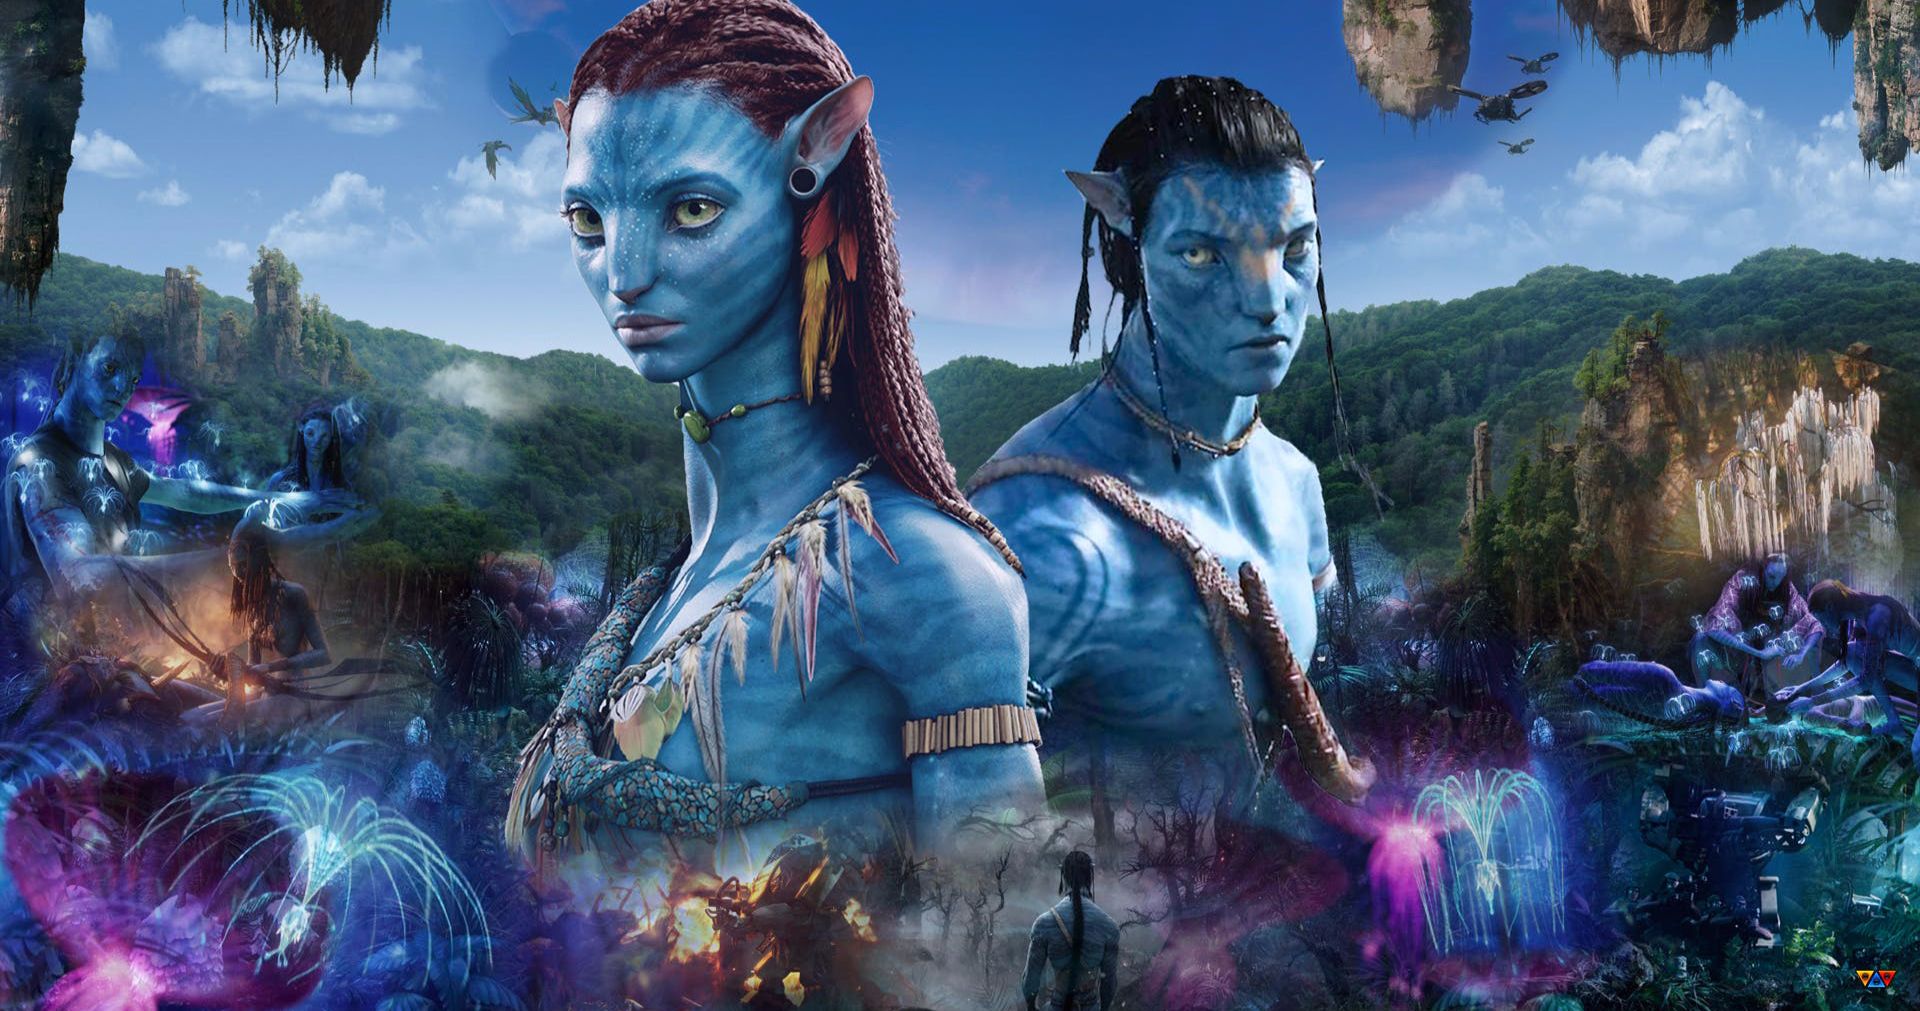 Epic Avatar 2 Set Photo Marks End of Live-Action Shoot for 2019